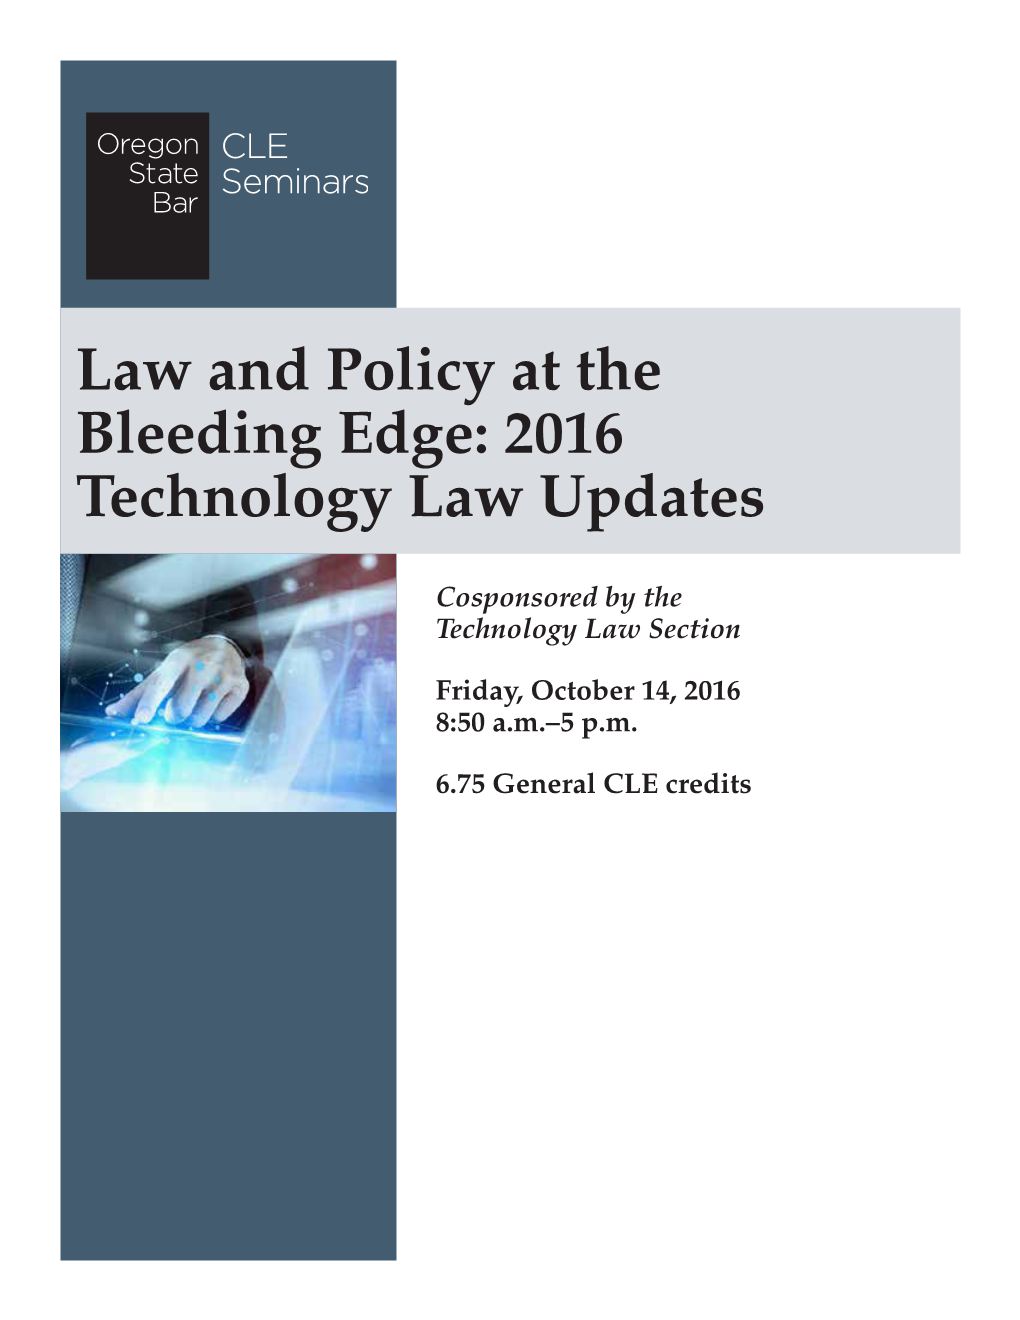 2016 Technology Law Updates